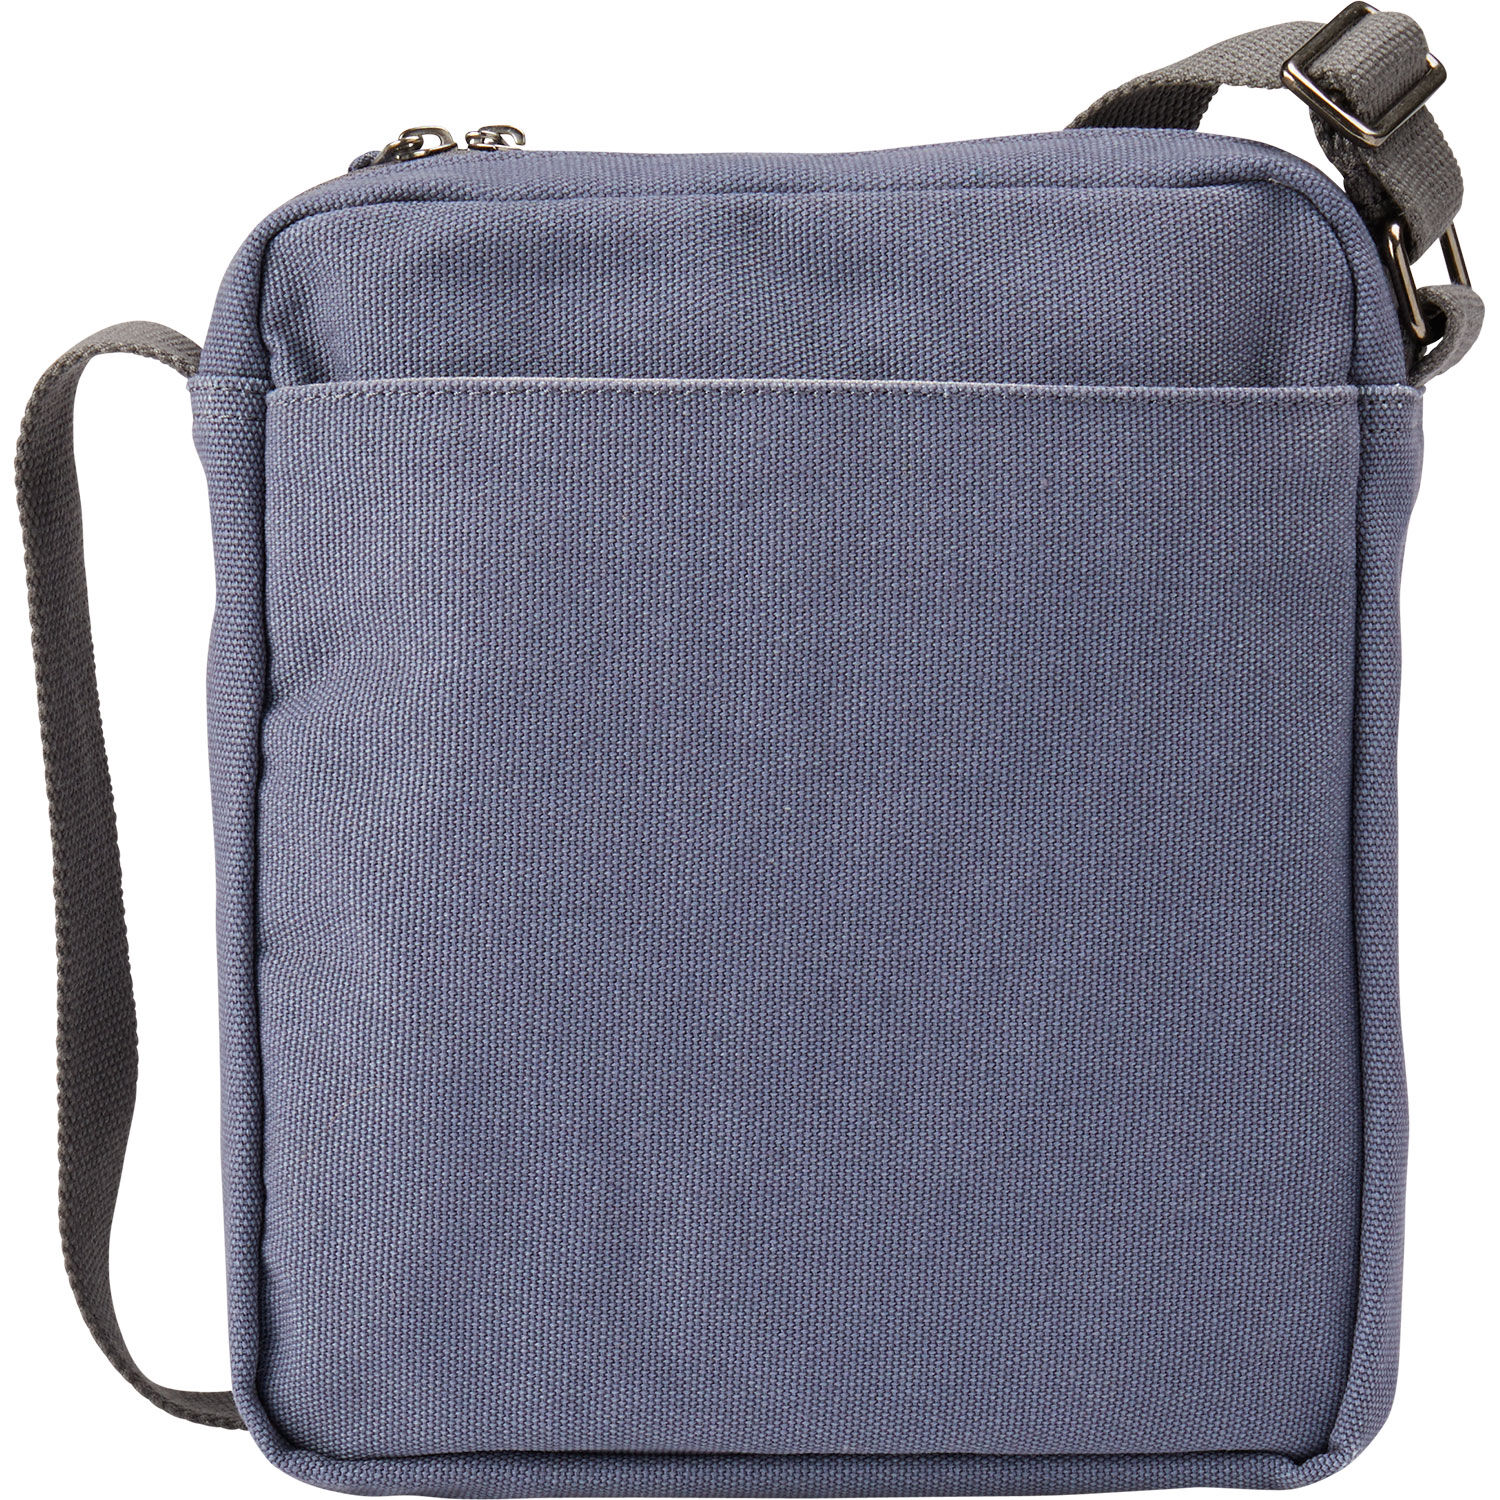 Women's Canvas Travel Zip Top Sling Bag | Duluth Trading Company